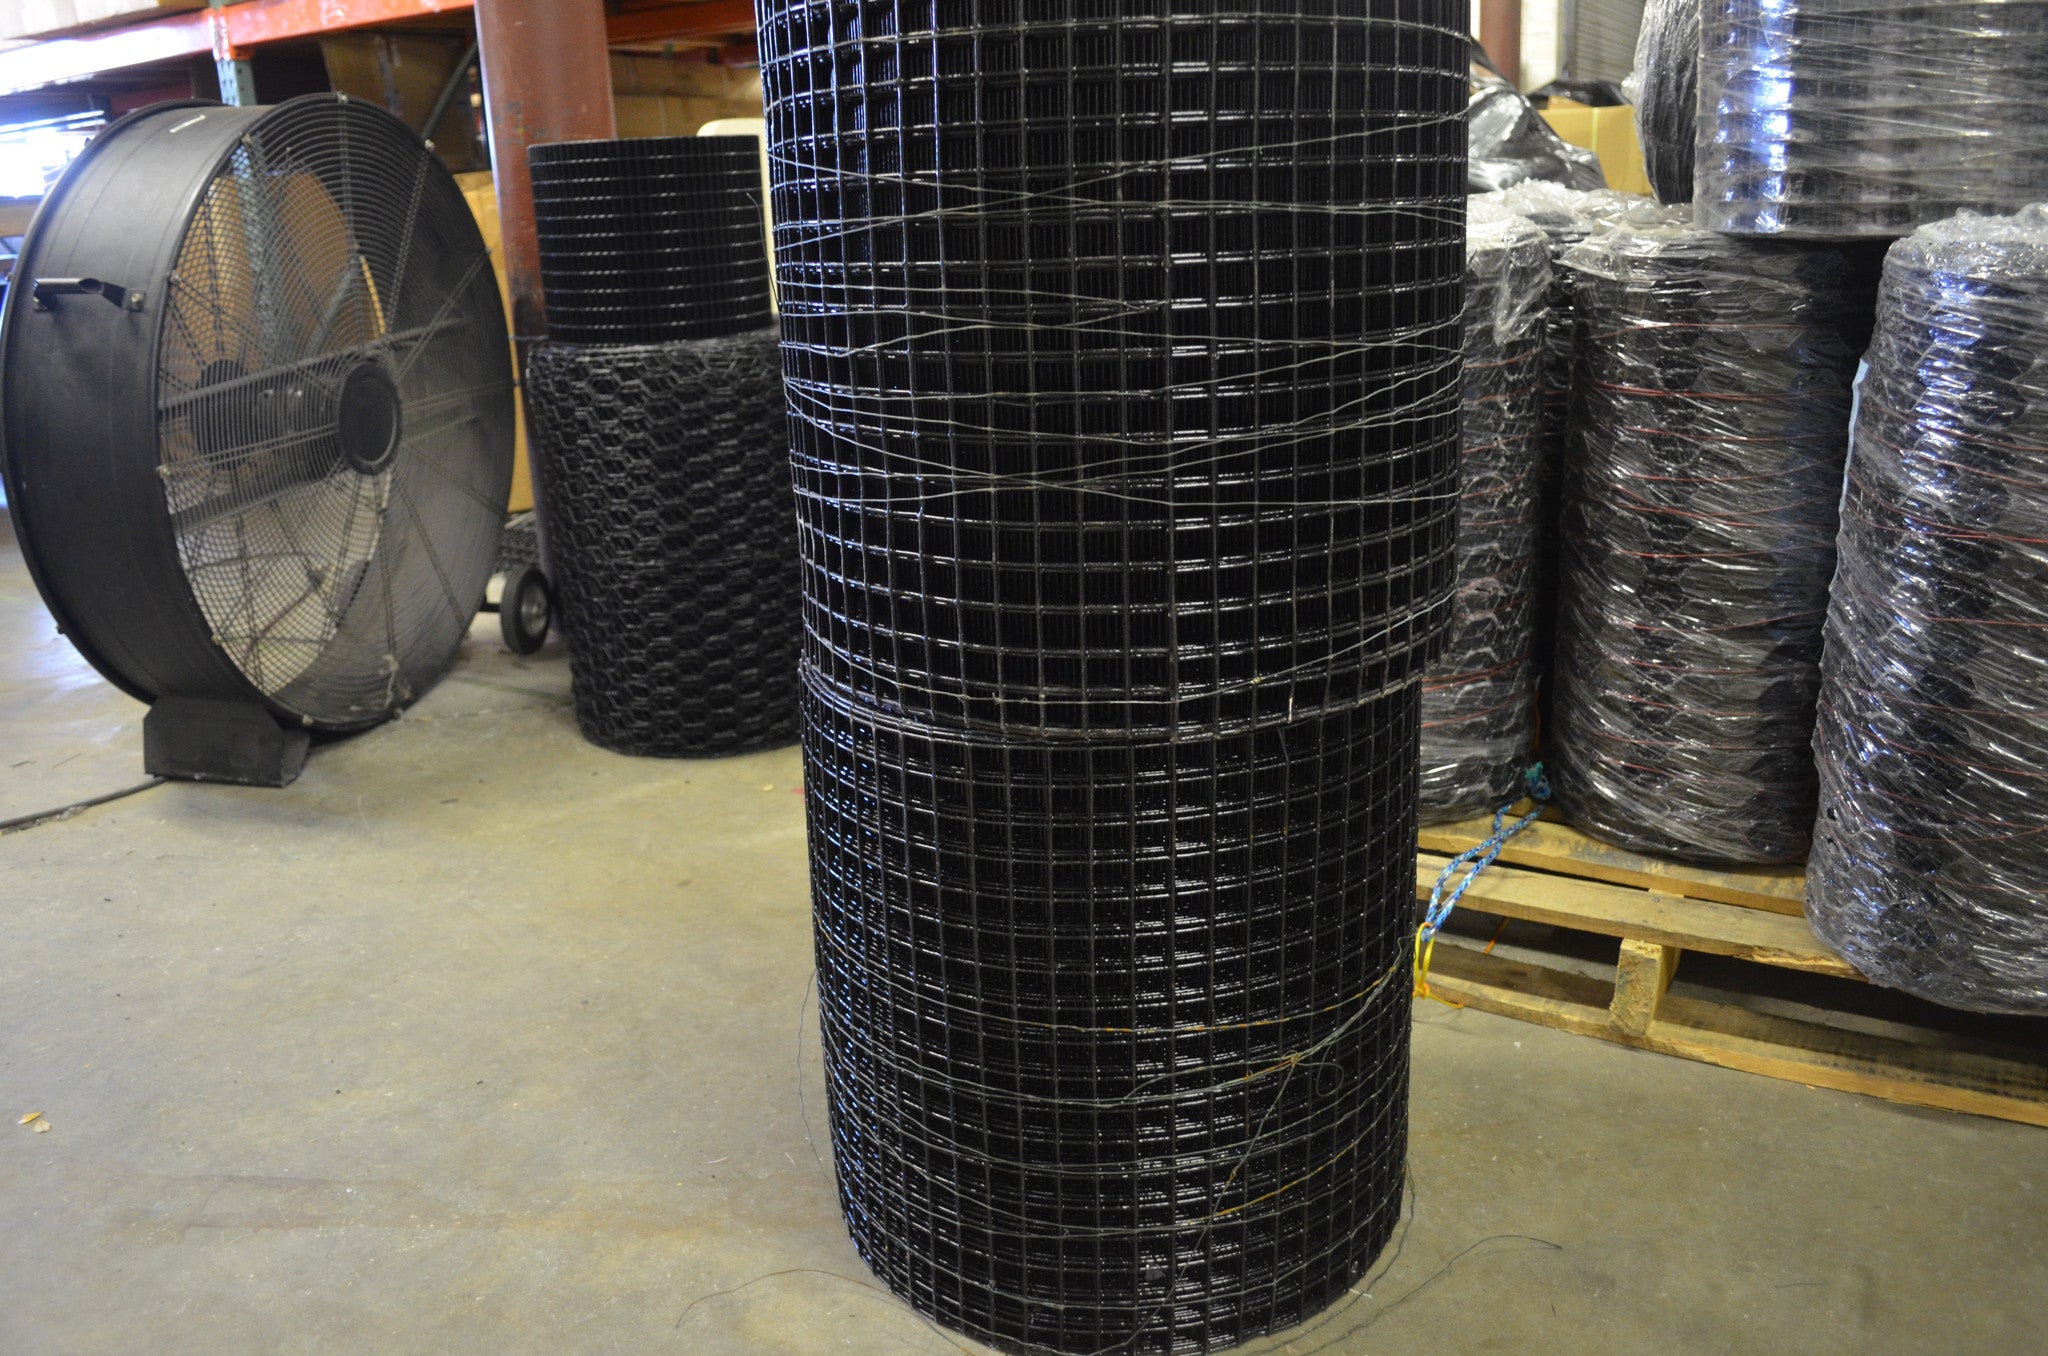 pvc coated wire mesh 1